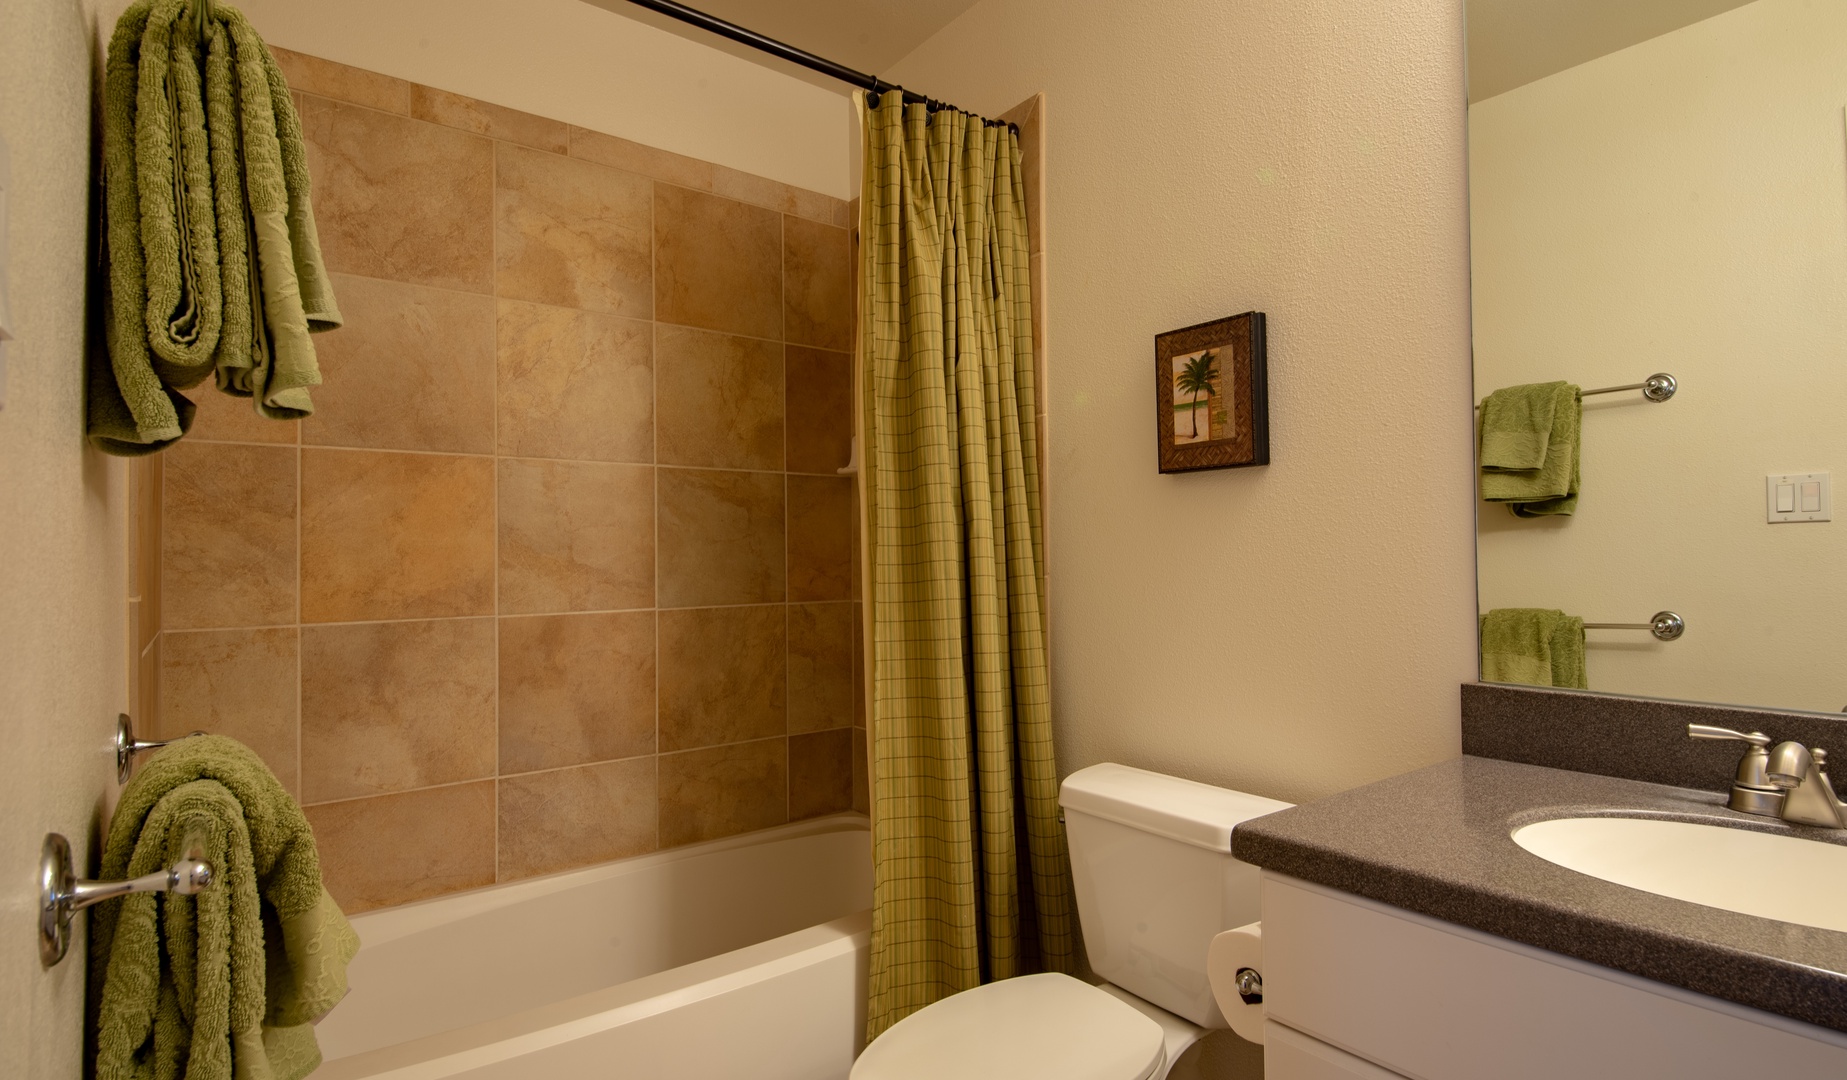 Kapolei Vacation Rentals, Ko Olina Kai 1047B - The second guest bathroom features a shower and tub combo.